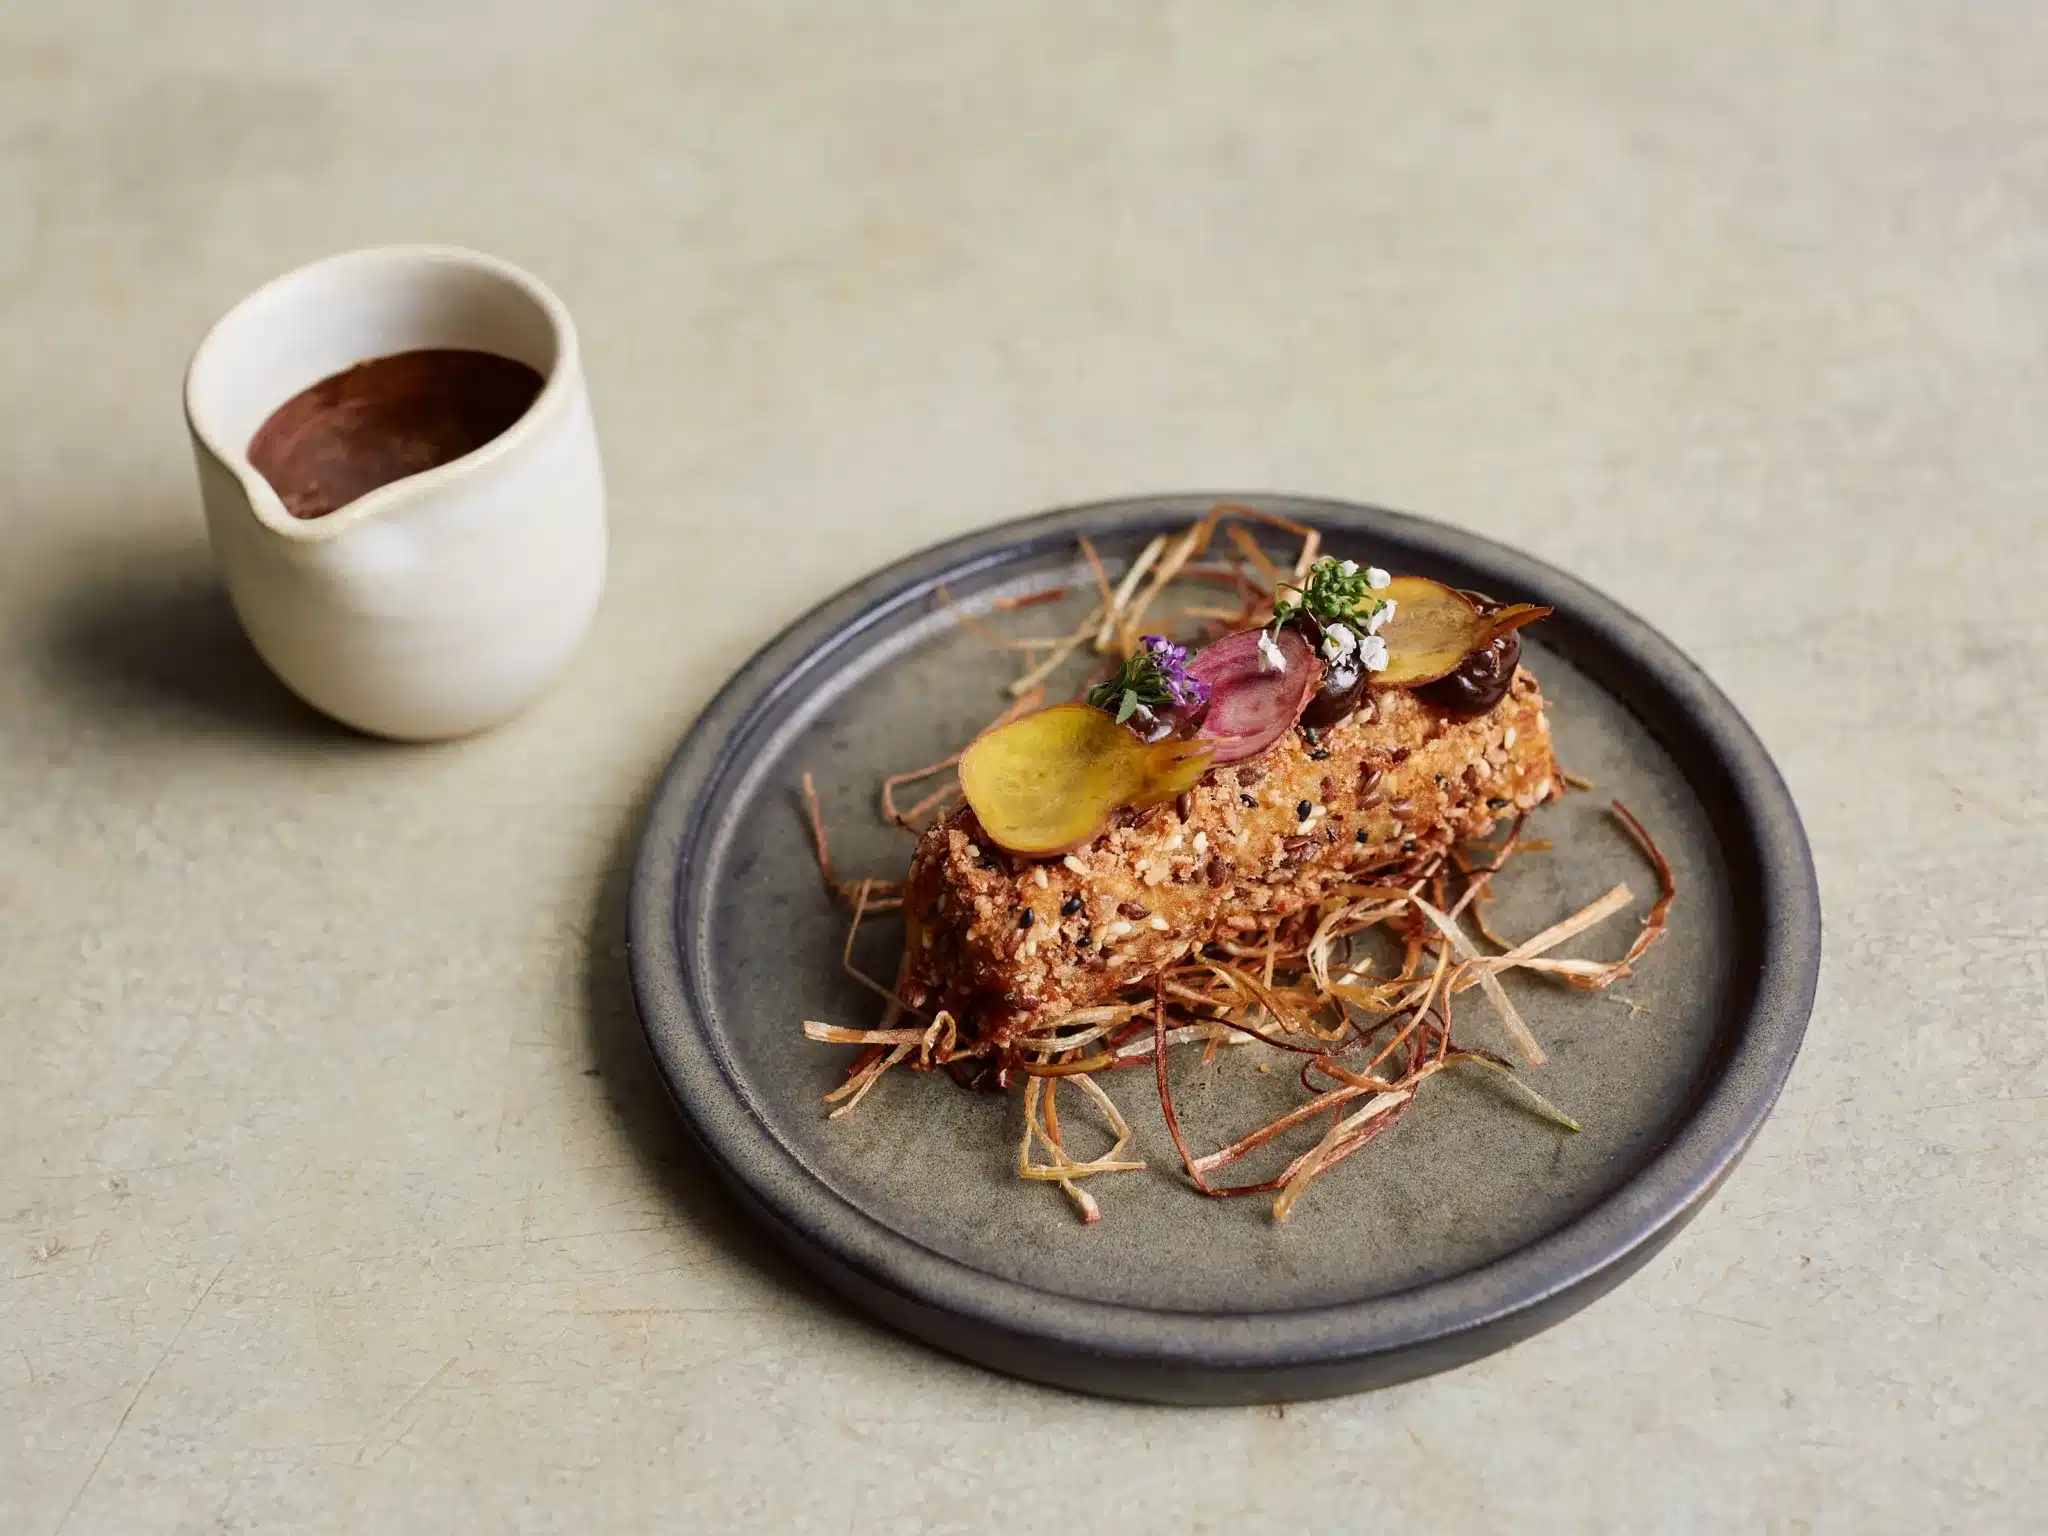 Holy Carrot Cowspiracy Shepherd S Pie Croquette With Smoked Beets, Crunchy Onion Hay, Black Lentils, Thyme Sauce By Lesley Lay